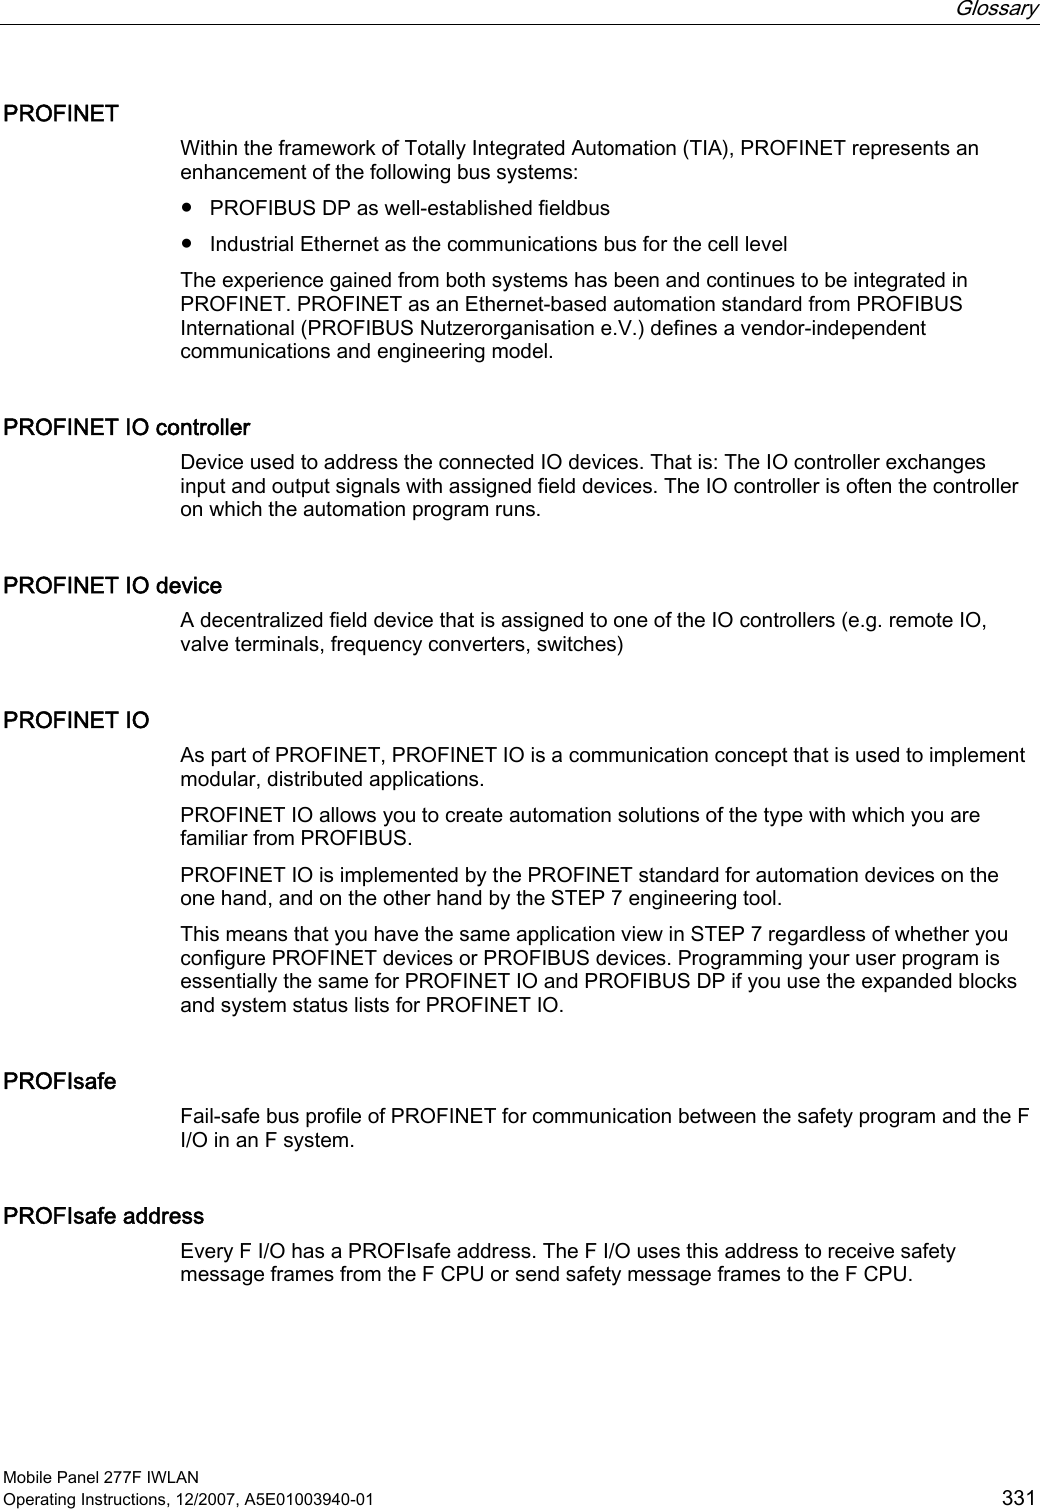  Glossary   Mobile Panel 277F IWLAN Operating Instructions, 12/2007, A5E01003940-01  331 PROFINET Within the framework of Totally Integrated Automation (TIA), PROFINET represents an enhancement of the following bus systems:  ●  PROFIBUS DP as well-established fieldbus ●  Industrial Ethernet as the communications bus for the cell level The experience gained from both systems has been and continues to be integrated in PROFINET. PROFINET as an Ethernet-based automation standard from PROFIBUS International (PROFIBUS Nutzerorganisation e.V.) defines a vendor-independent communications and engineering model. PROFINET IO controller Device used to address the connected IO devices. That is: The IO controller exchanges input and output signals with assigned field devices. The IO controller is often the controller on which the automation program runs. PROFINET IO device A decentralized field device that is assigned to one of the IO controllers (e.g. remote IO, valve terminals, frequency converters, switches)  PROFINET IO As part of PROFINET, PROFINET IO is a communication concept that is used to implement modular, distributed applications.  PROFINET IO allows you to create automation solutions of the type with which you are familiar from PROFIBUS.  PROFINET IO is implemented by the PROFINET standard for automation devices on the one hand, and on the other hand by the STEP 7 engineering tool.  This means that you have the same application view in STEP 7 regardless of whether you configure PROFINET devices or PROFIBUS devices. Programming your user program is essentially the same for PROFINET IO and PROFIBUS DP if you use the expanded blocks and system status lists for PROFINET IO. PROFIsafe Fail-safe bus profile of PROFINET for communication between the safety program and the F I/O in an F system. PROFIsafe address Every F I/O has a PROFIsafe address. The F I/O uses this address to receive safety message frames from the F CPU or send safety message frames to the F CPU. 